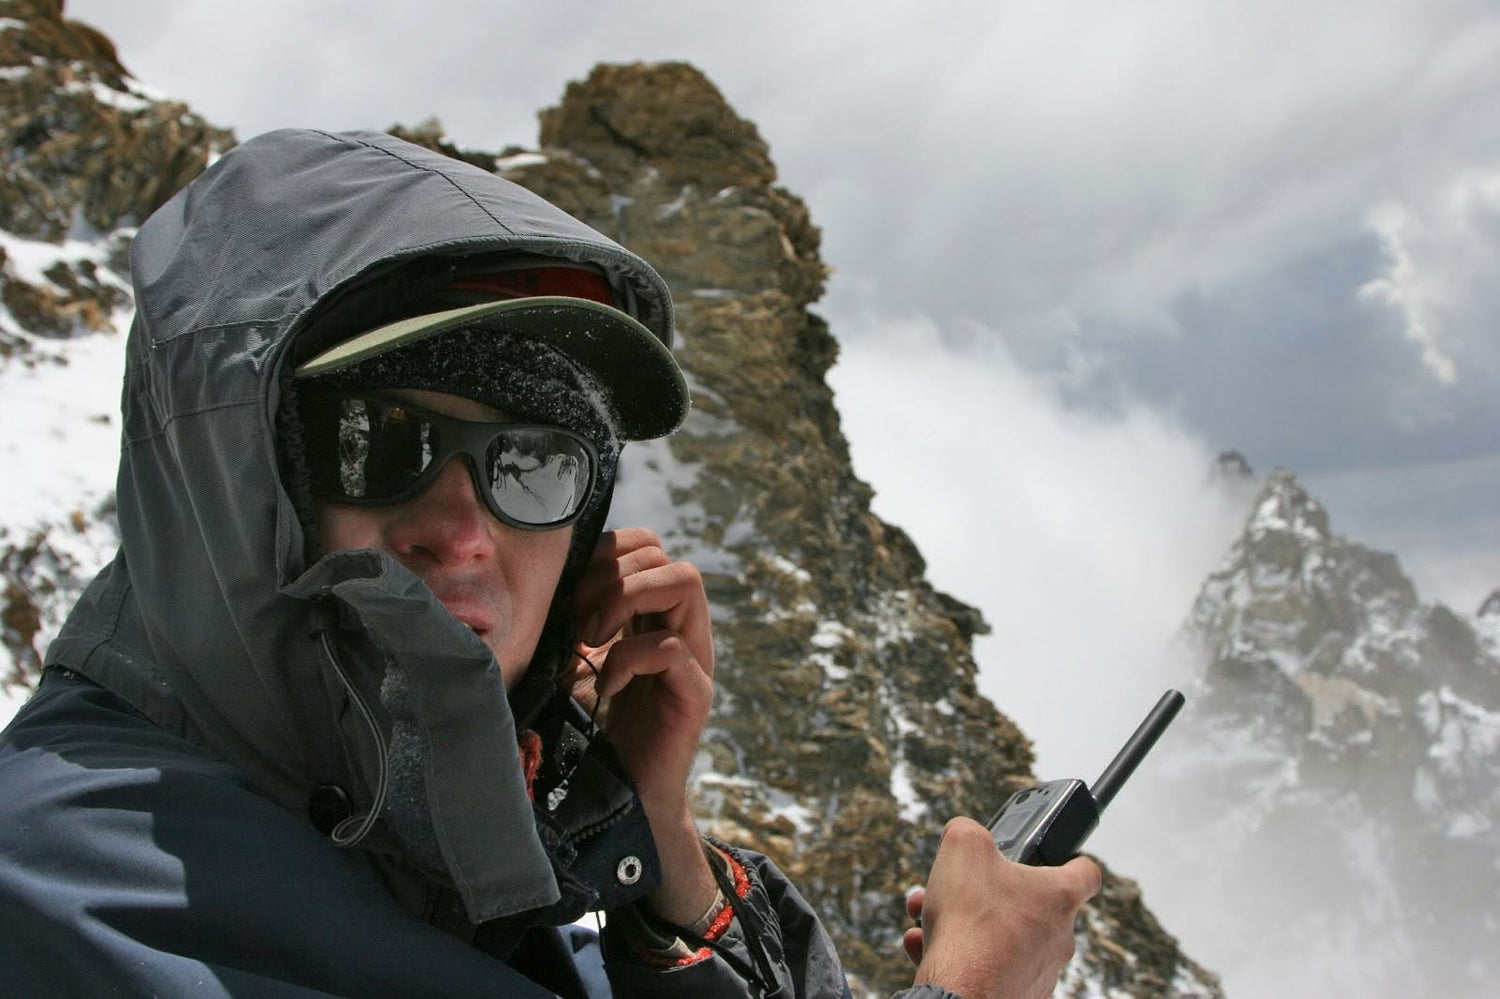 Staying Connected: Communication Tools for Remote Outdoor Adventures